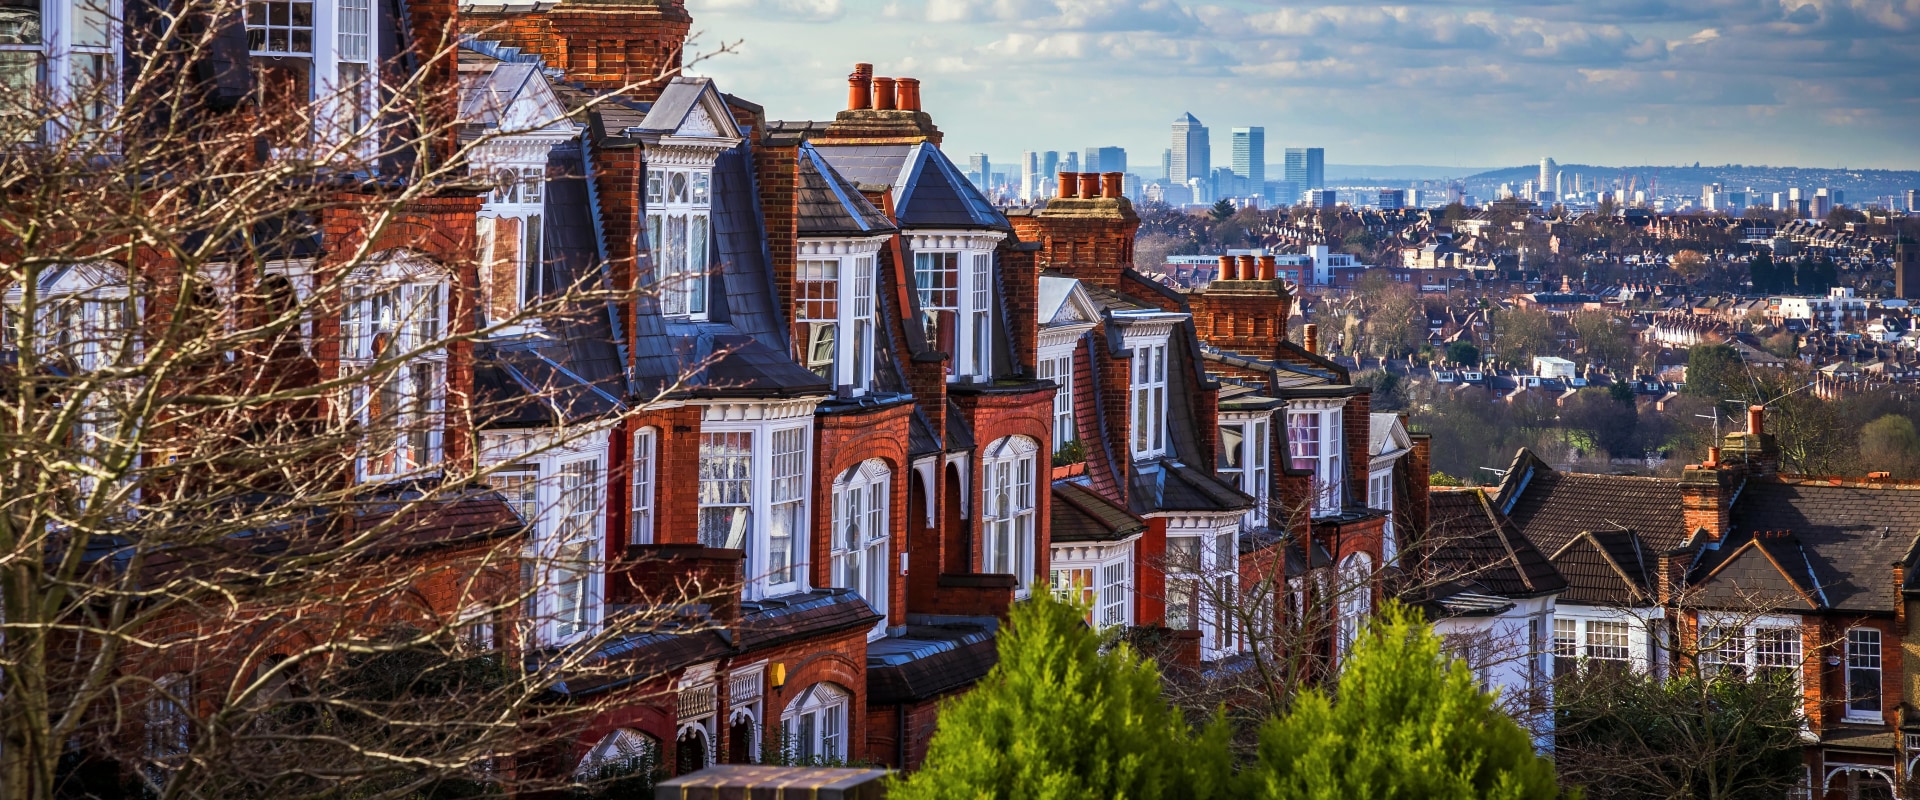 How Much Does it Cost to Buy a House in South London?